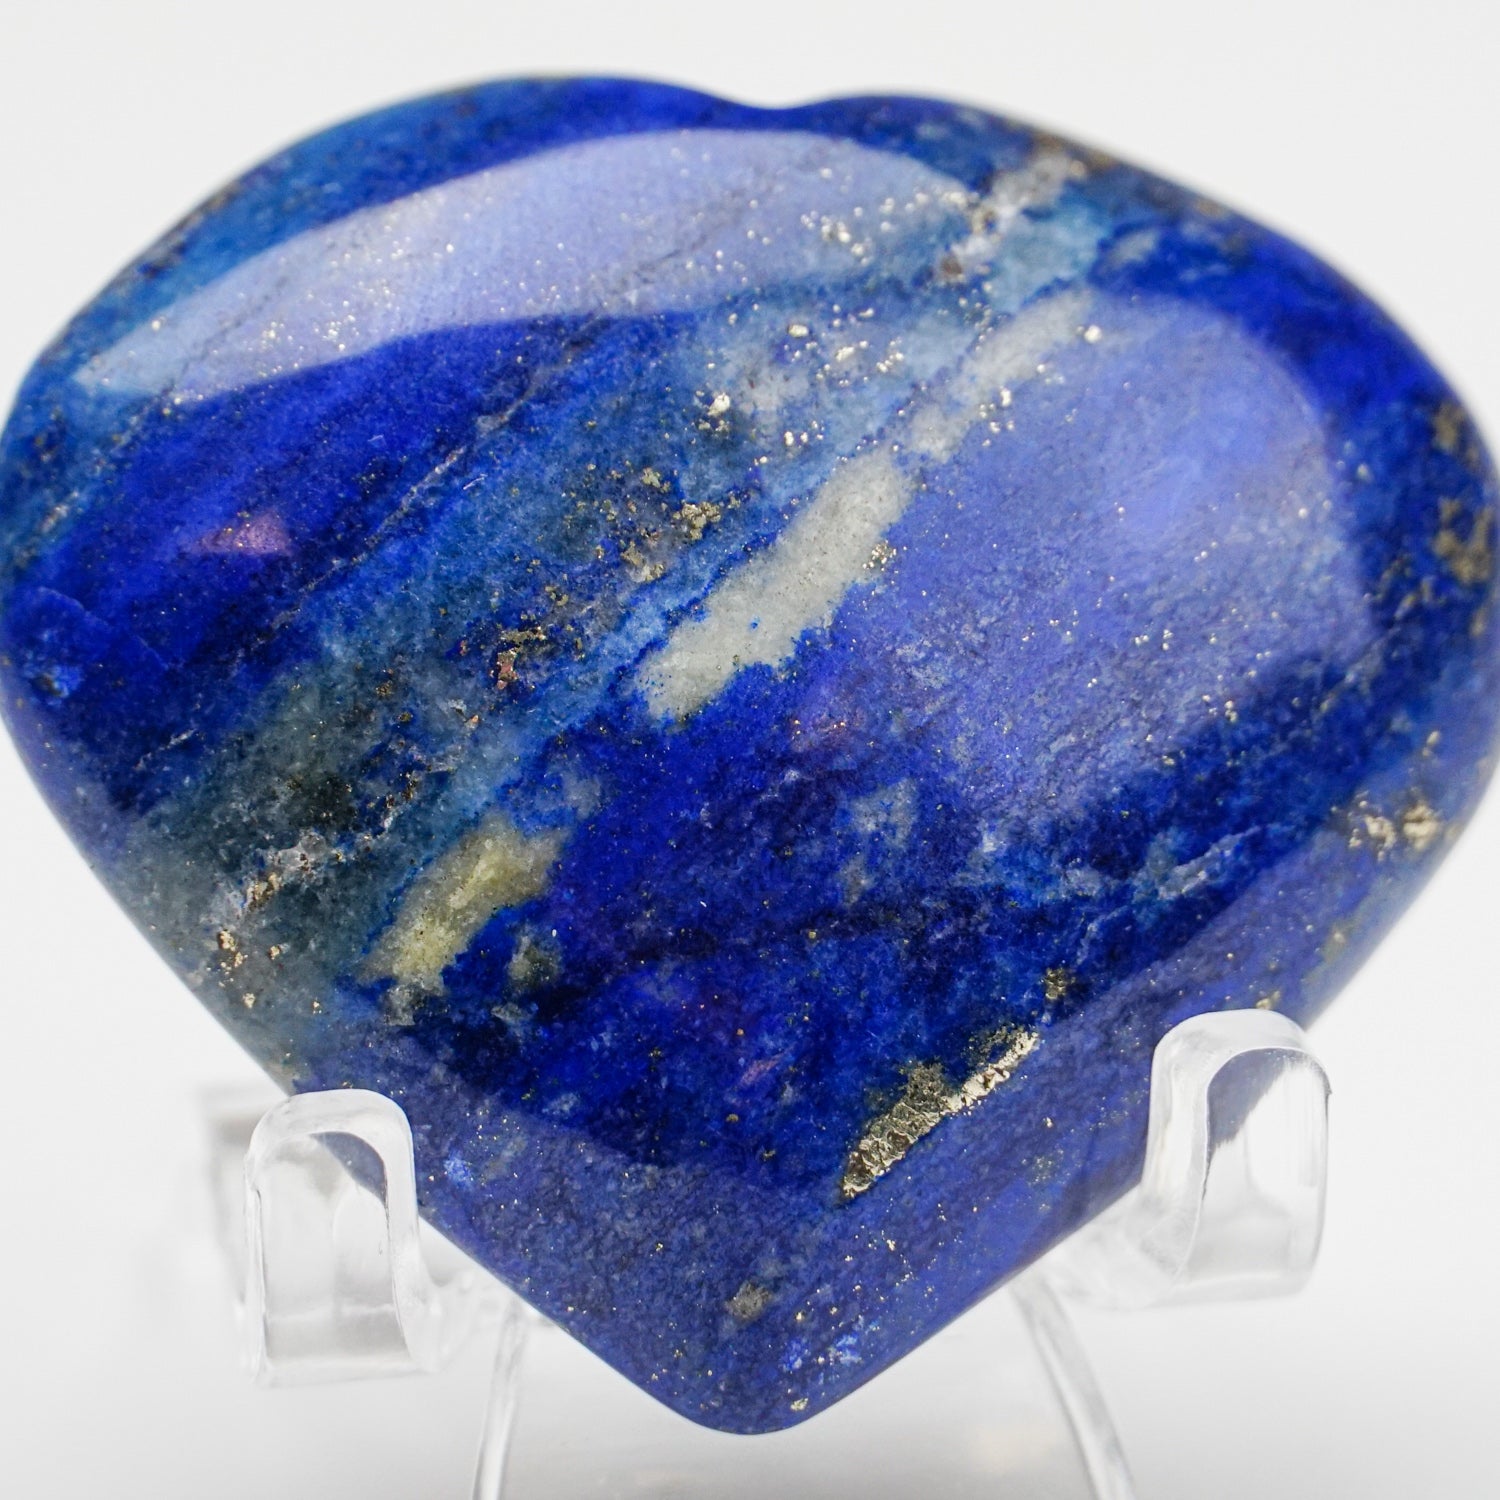 Polished Lapis Lazuli Heart from Afghanistan (36.8 grams)